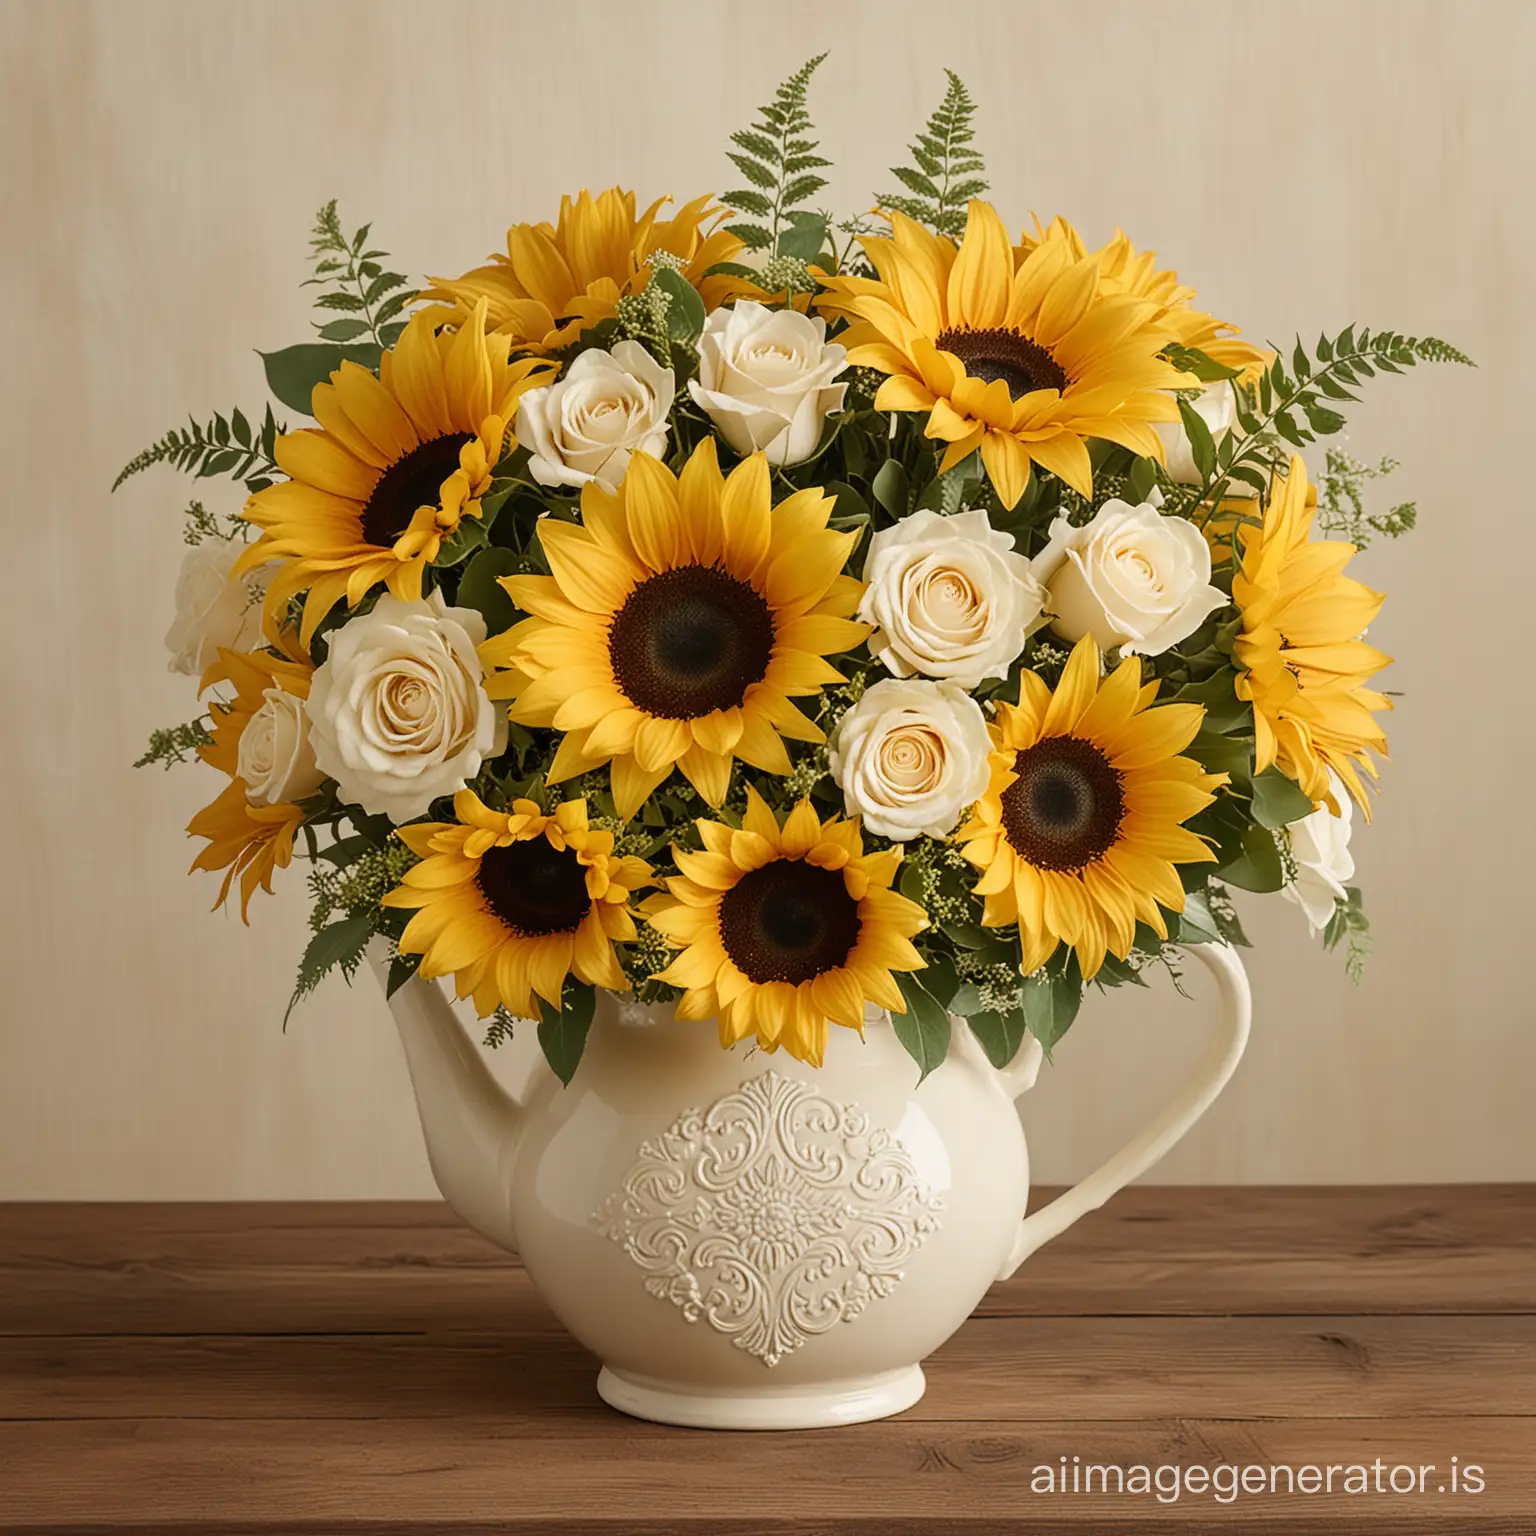 A romantic blend of bold sunflowers and delicate ivory roses, set in an elegant antique pitcher, creates a centerpiece that’s both nostalgic and heartwarming. This arrangement captures the essence of vintage romance with every bloom.